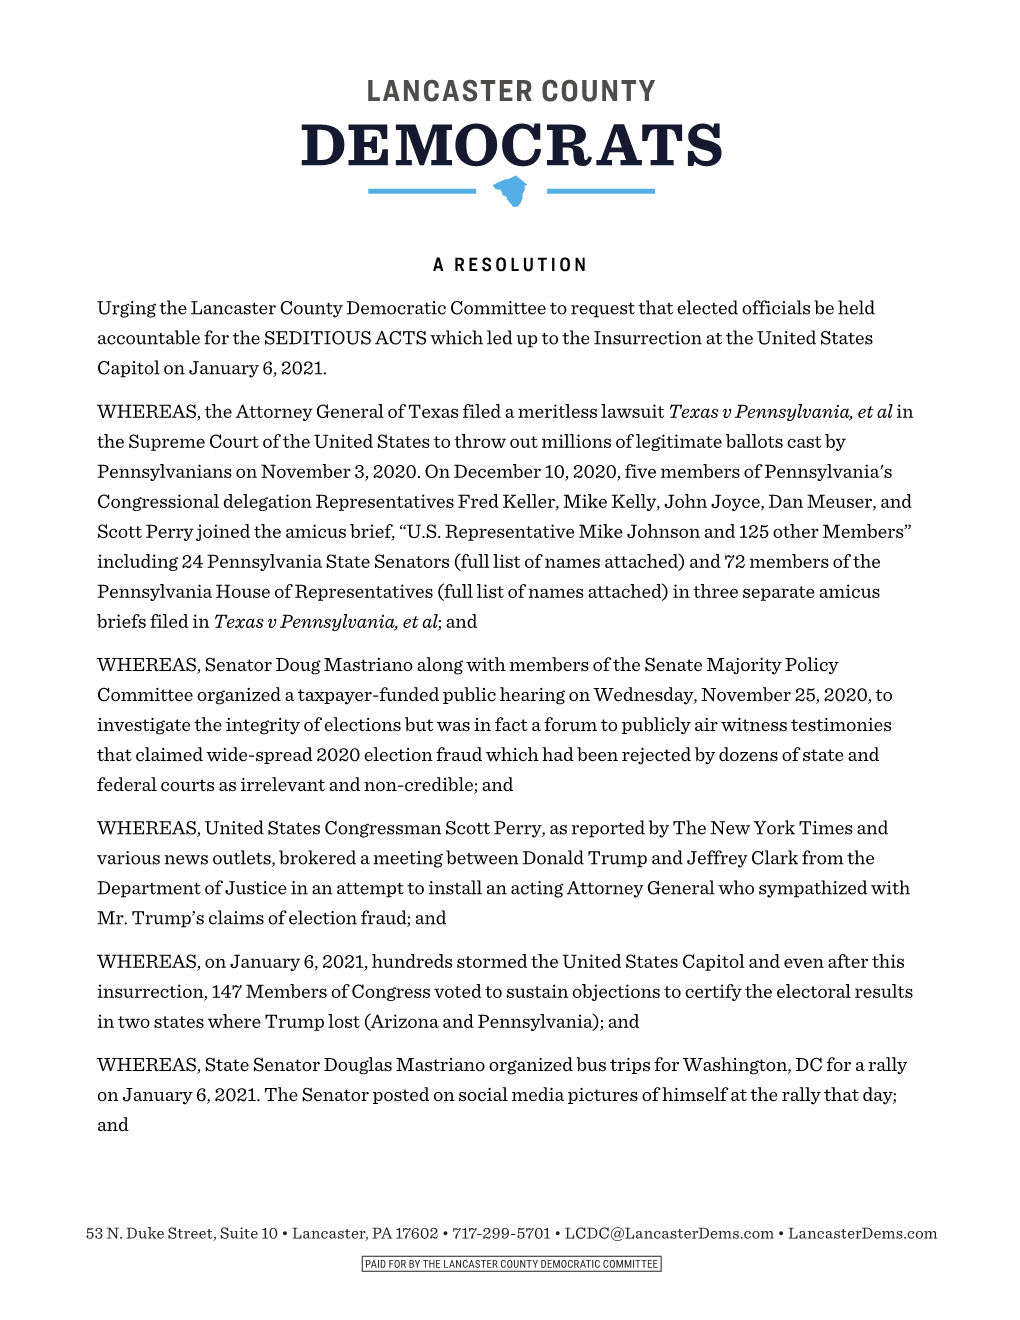 A RESOLUTION Urging the Lancaster County Democratic Committee To